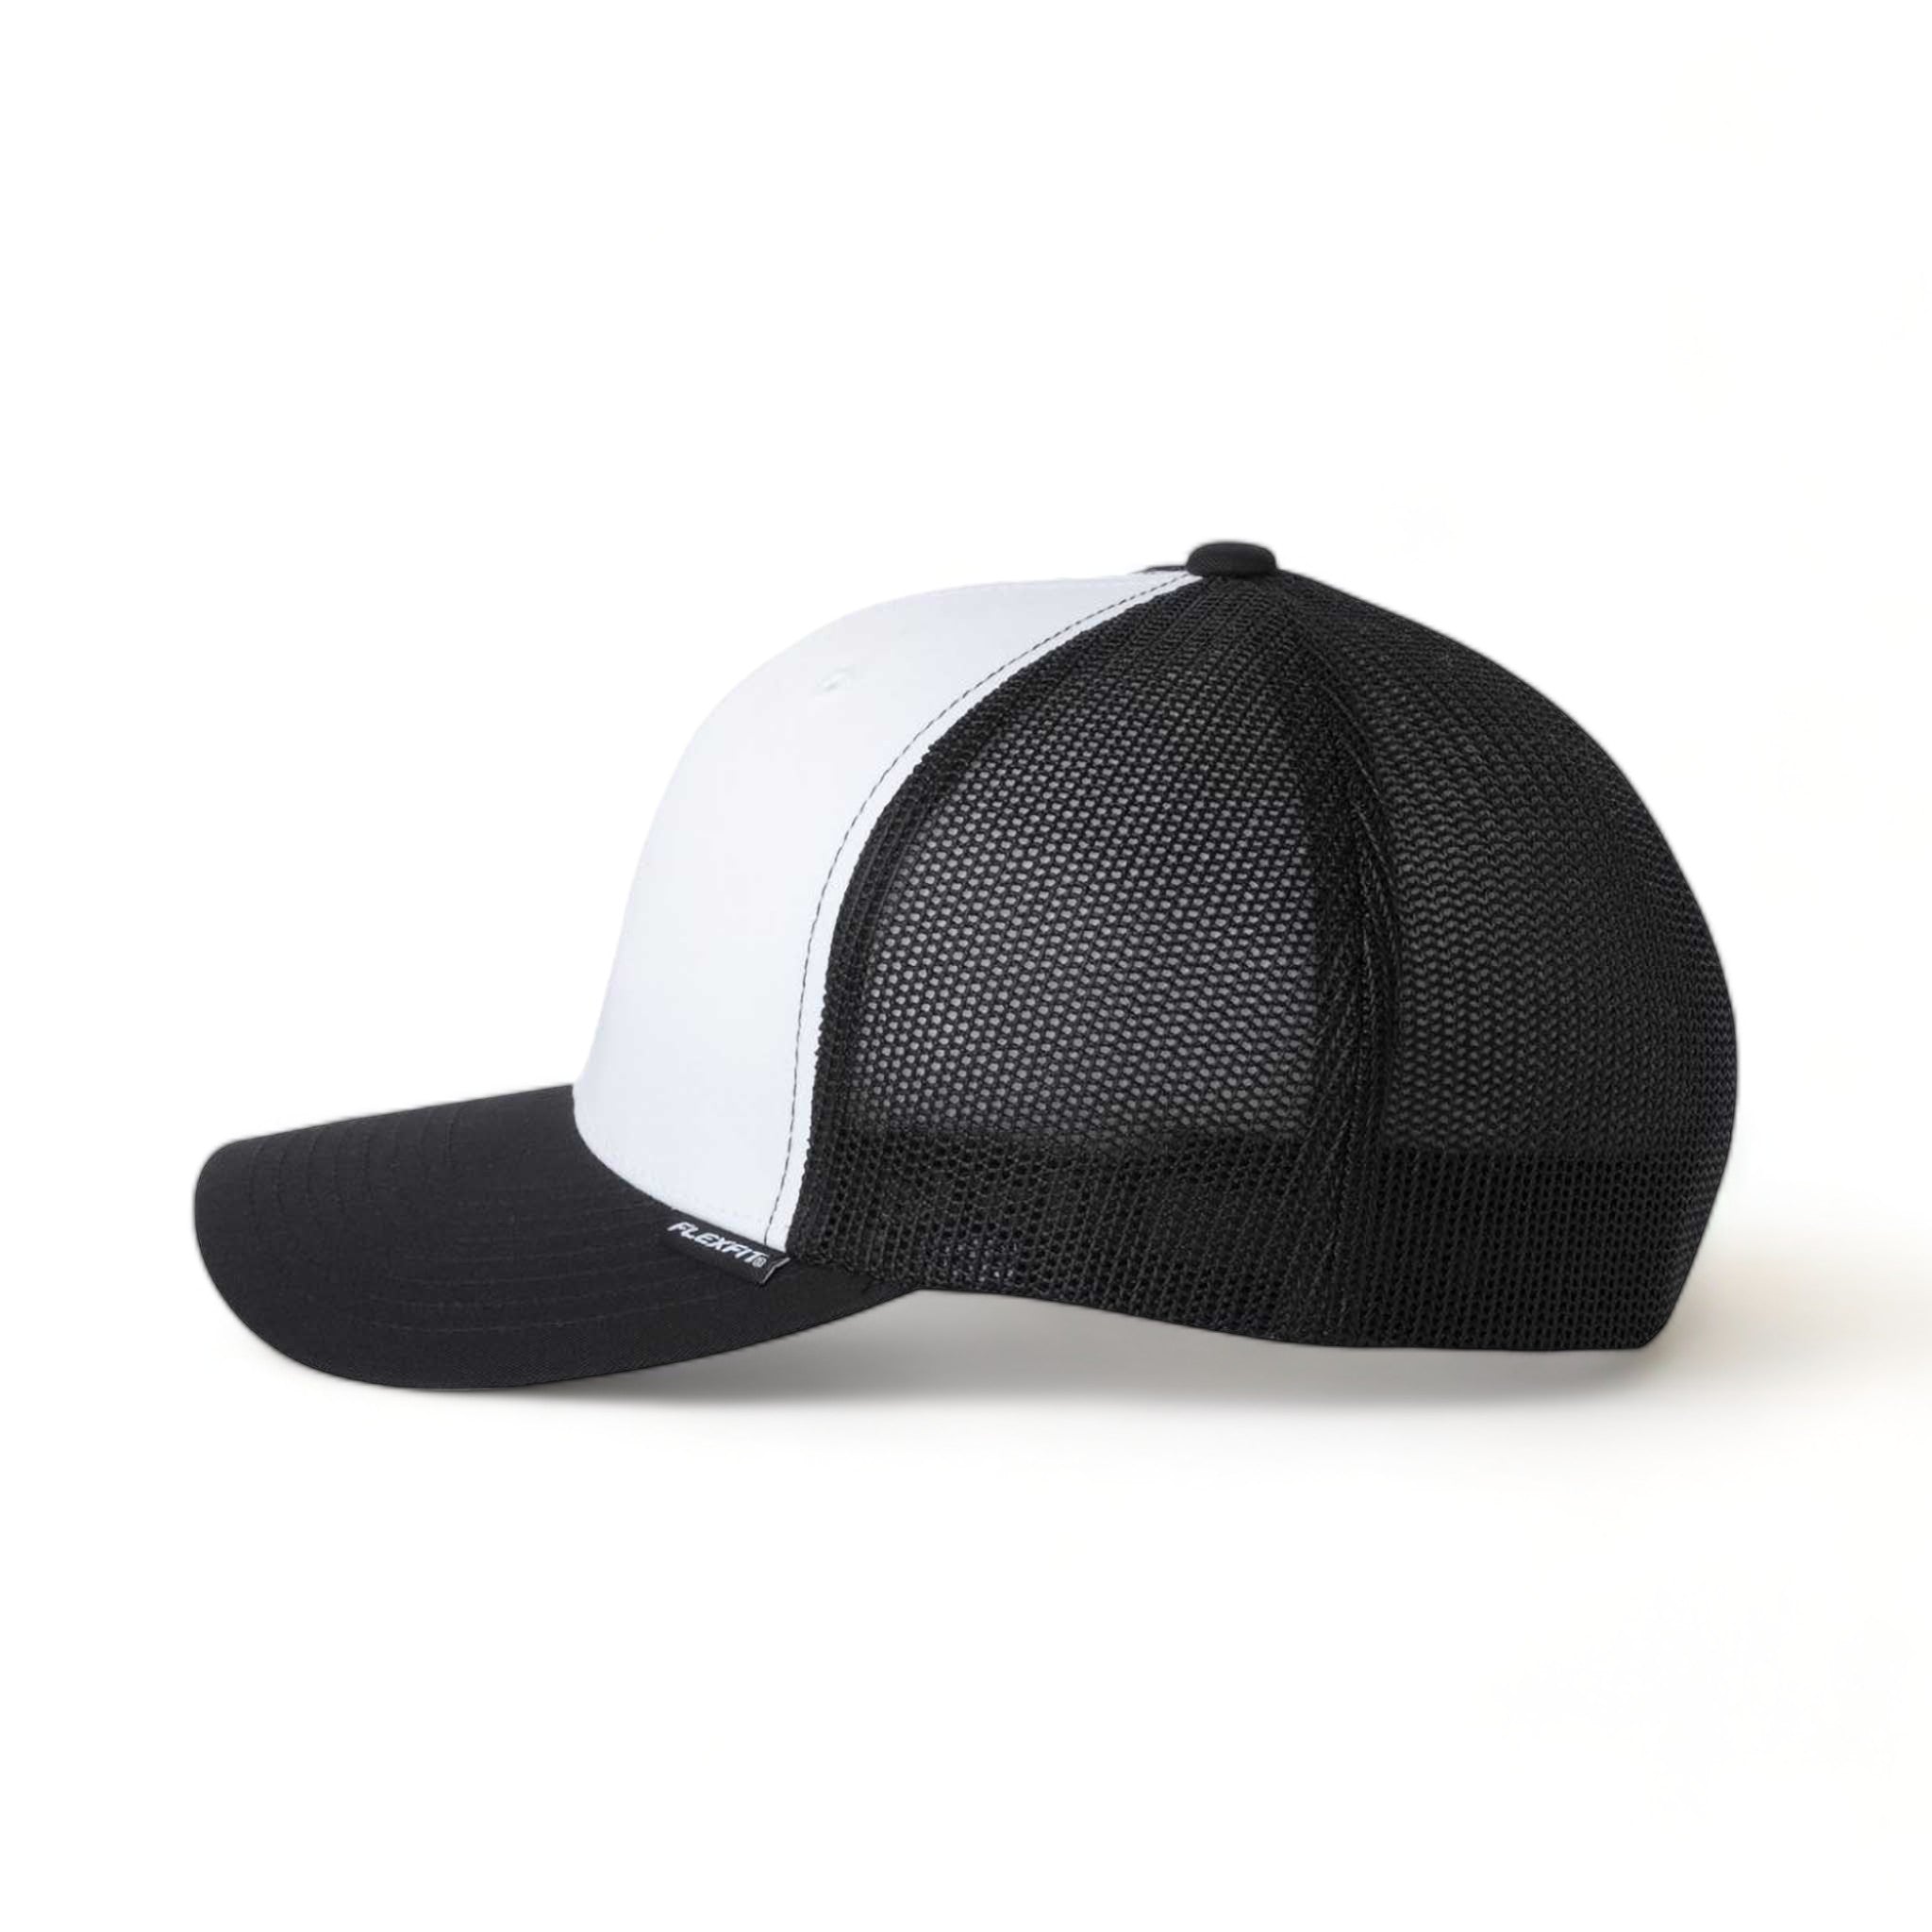 Side view of Flexfit 6511 custom hat in black, white and black